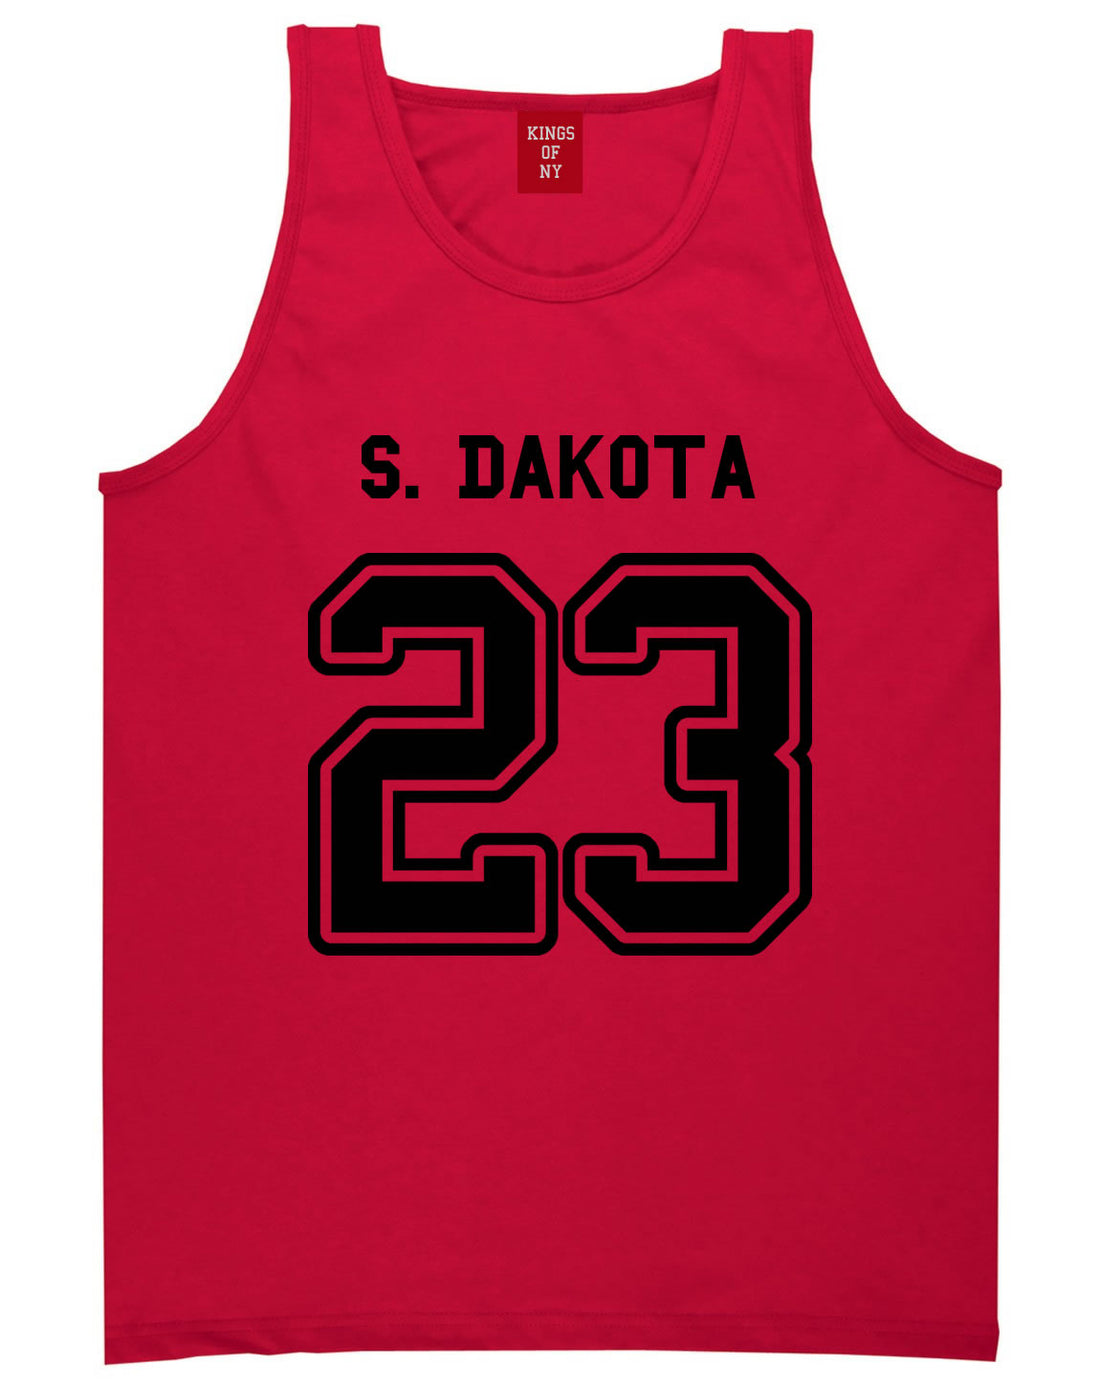 Sport Style South Dakota 23 Team State Jersey Mens Tank Top By Kings Of NY